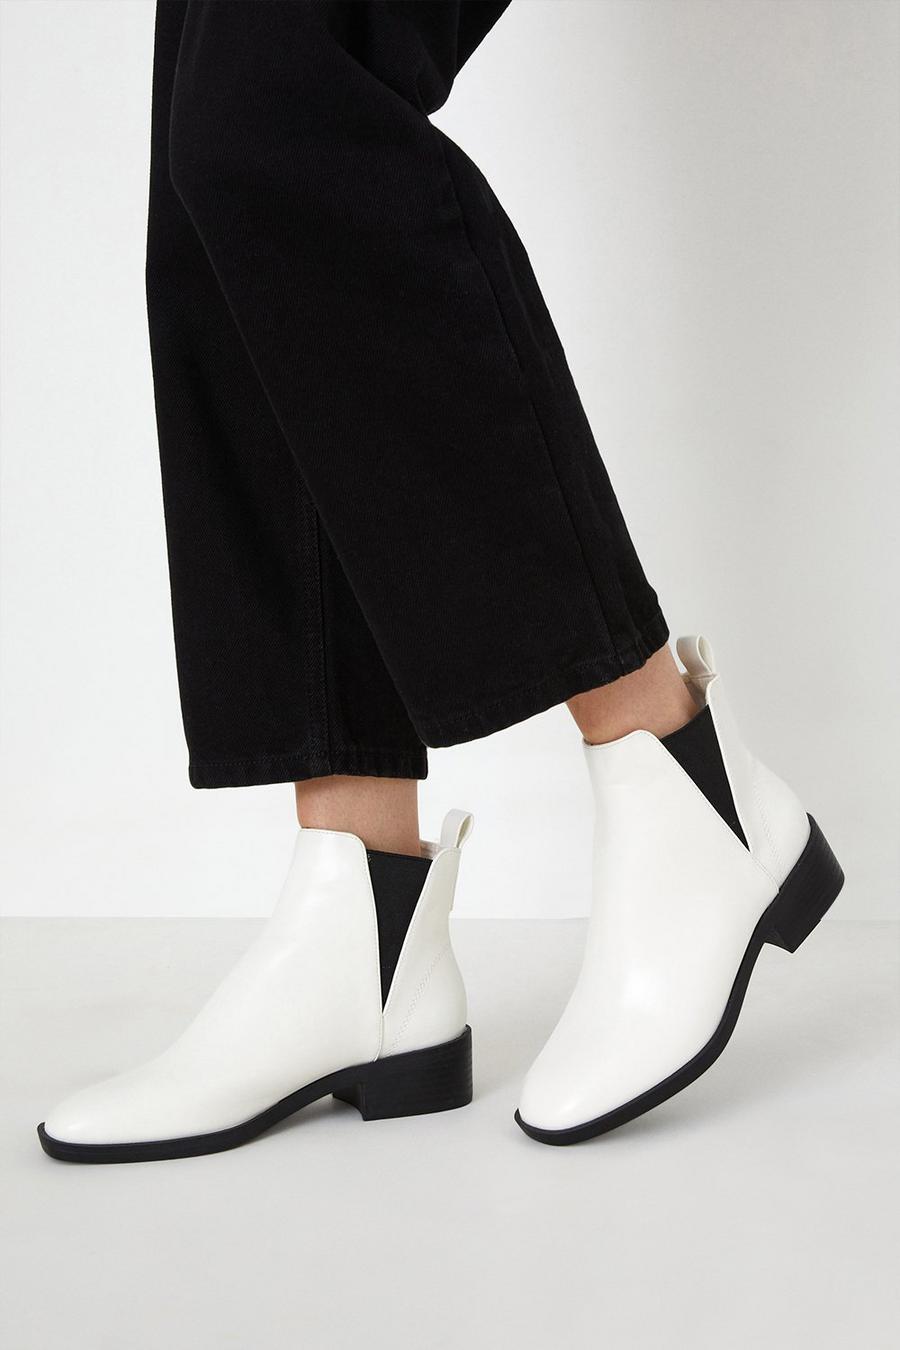 *Alfie Ankle Boot